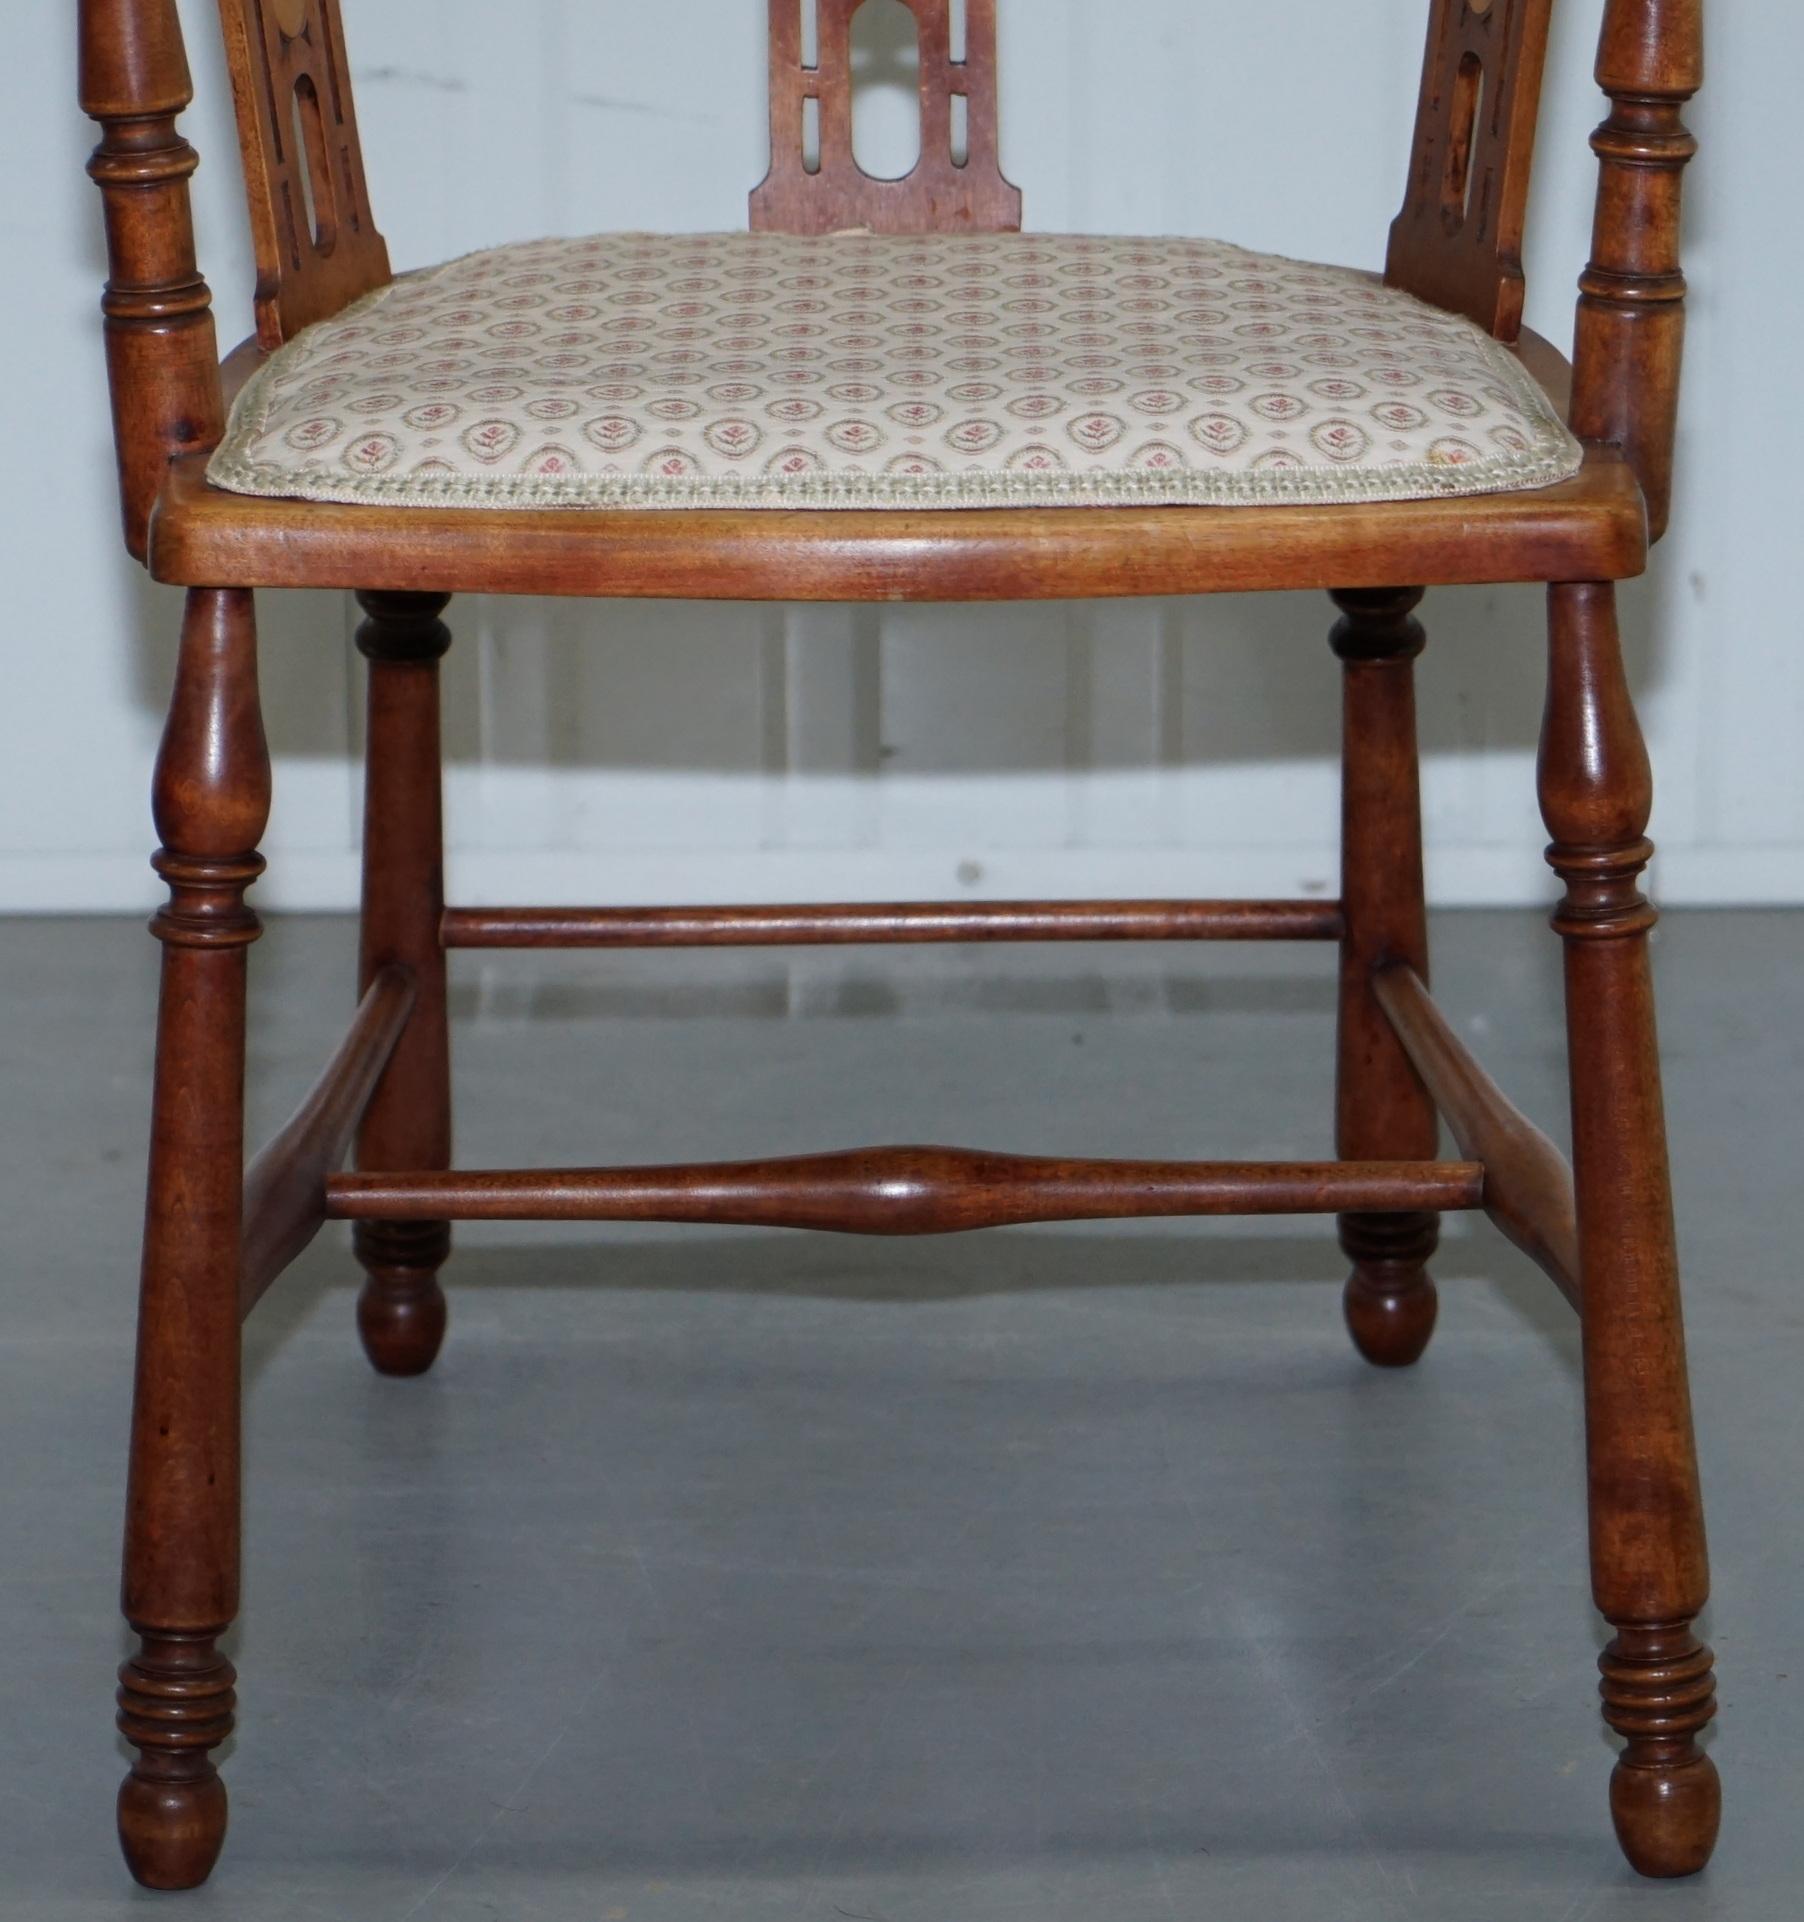 Mother-of-Pearl Stunning Edwardian Bow Back Walnut Chair Arts & Crafts Mother of Pearl Inlay For Sale